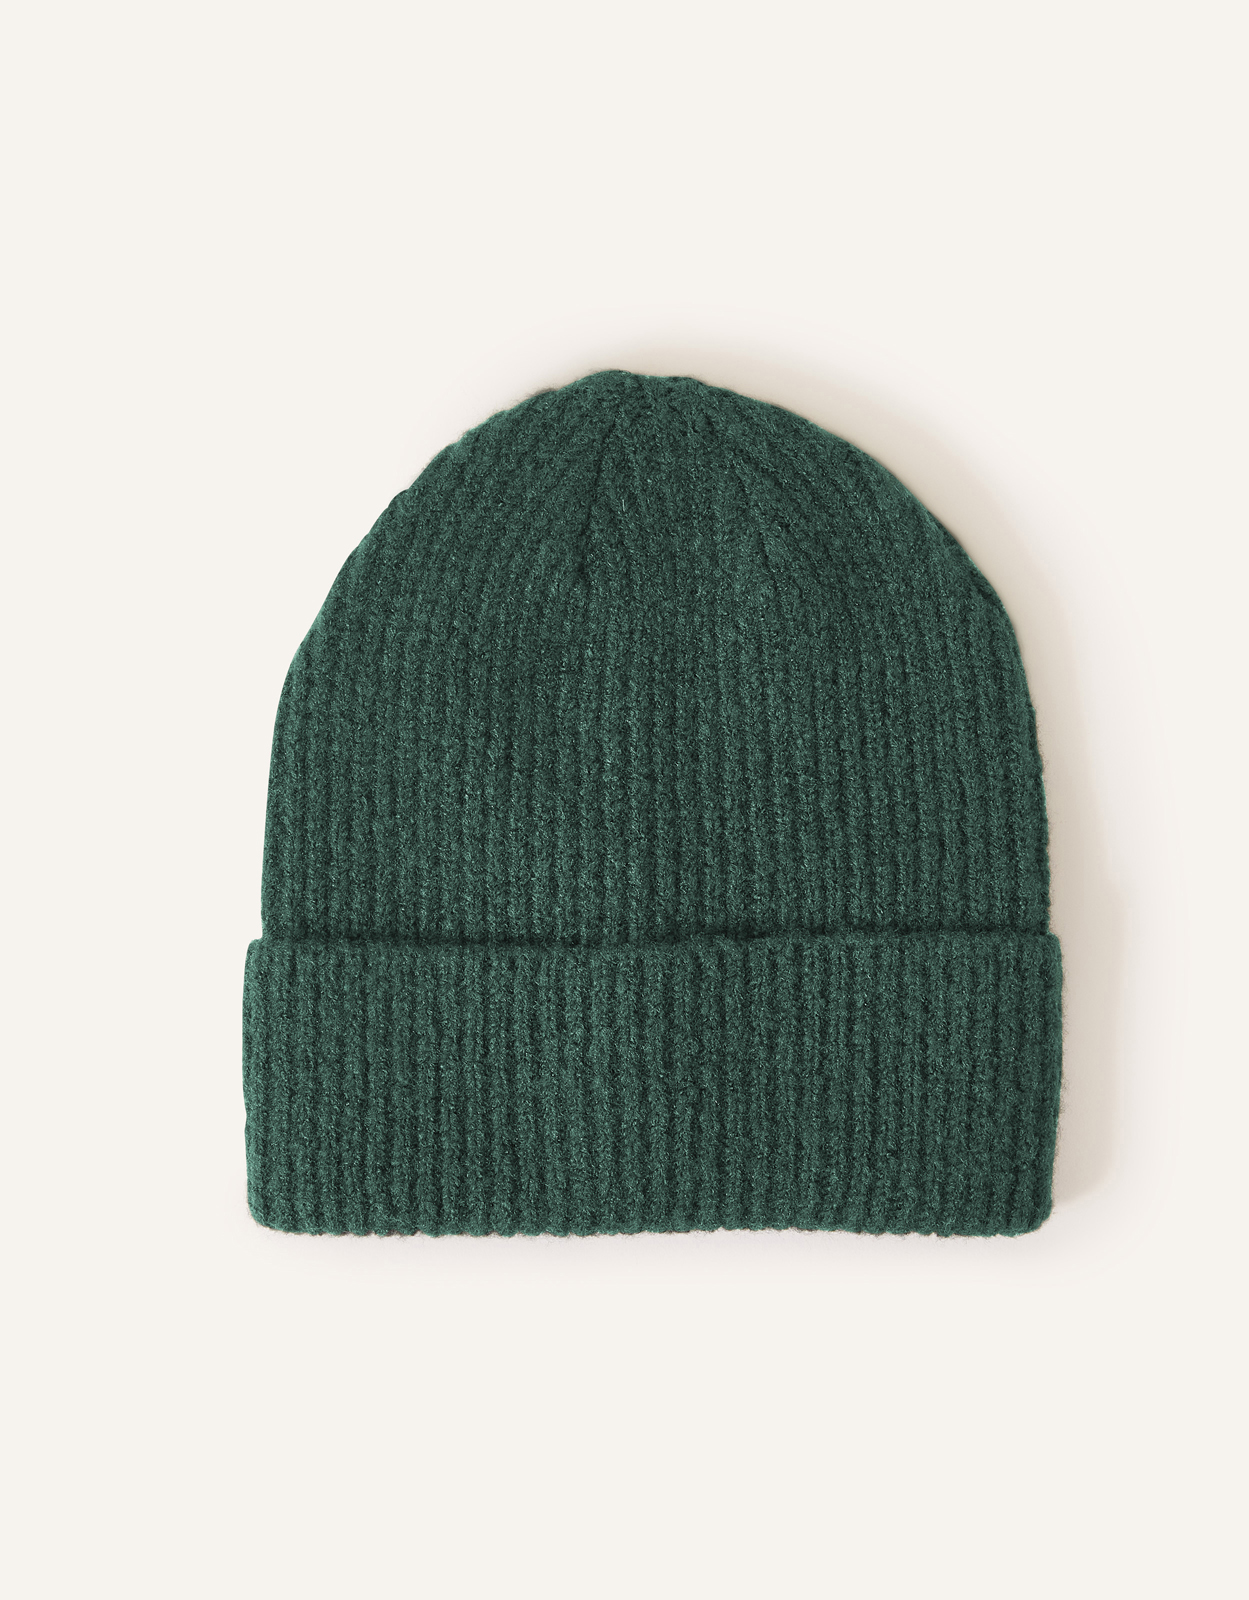 Accessorize Green Classic Knitted Acrylic Soho Beanie Hat, Size: 22x8cm